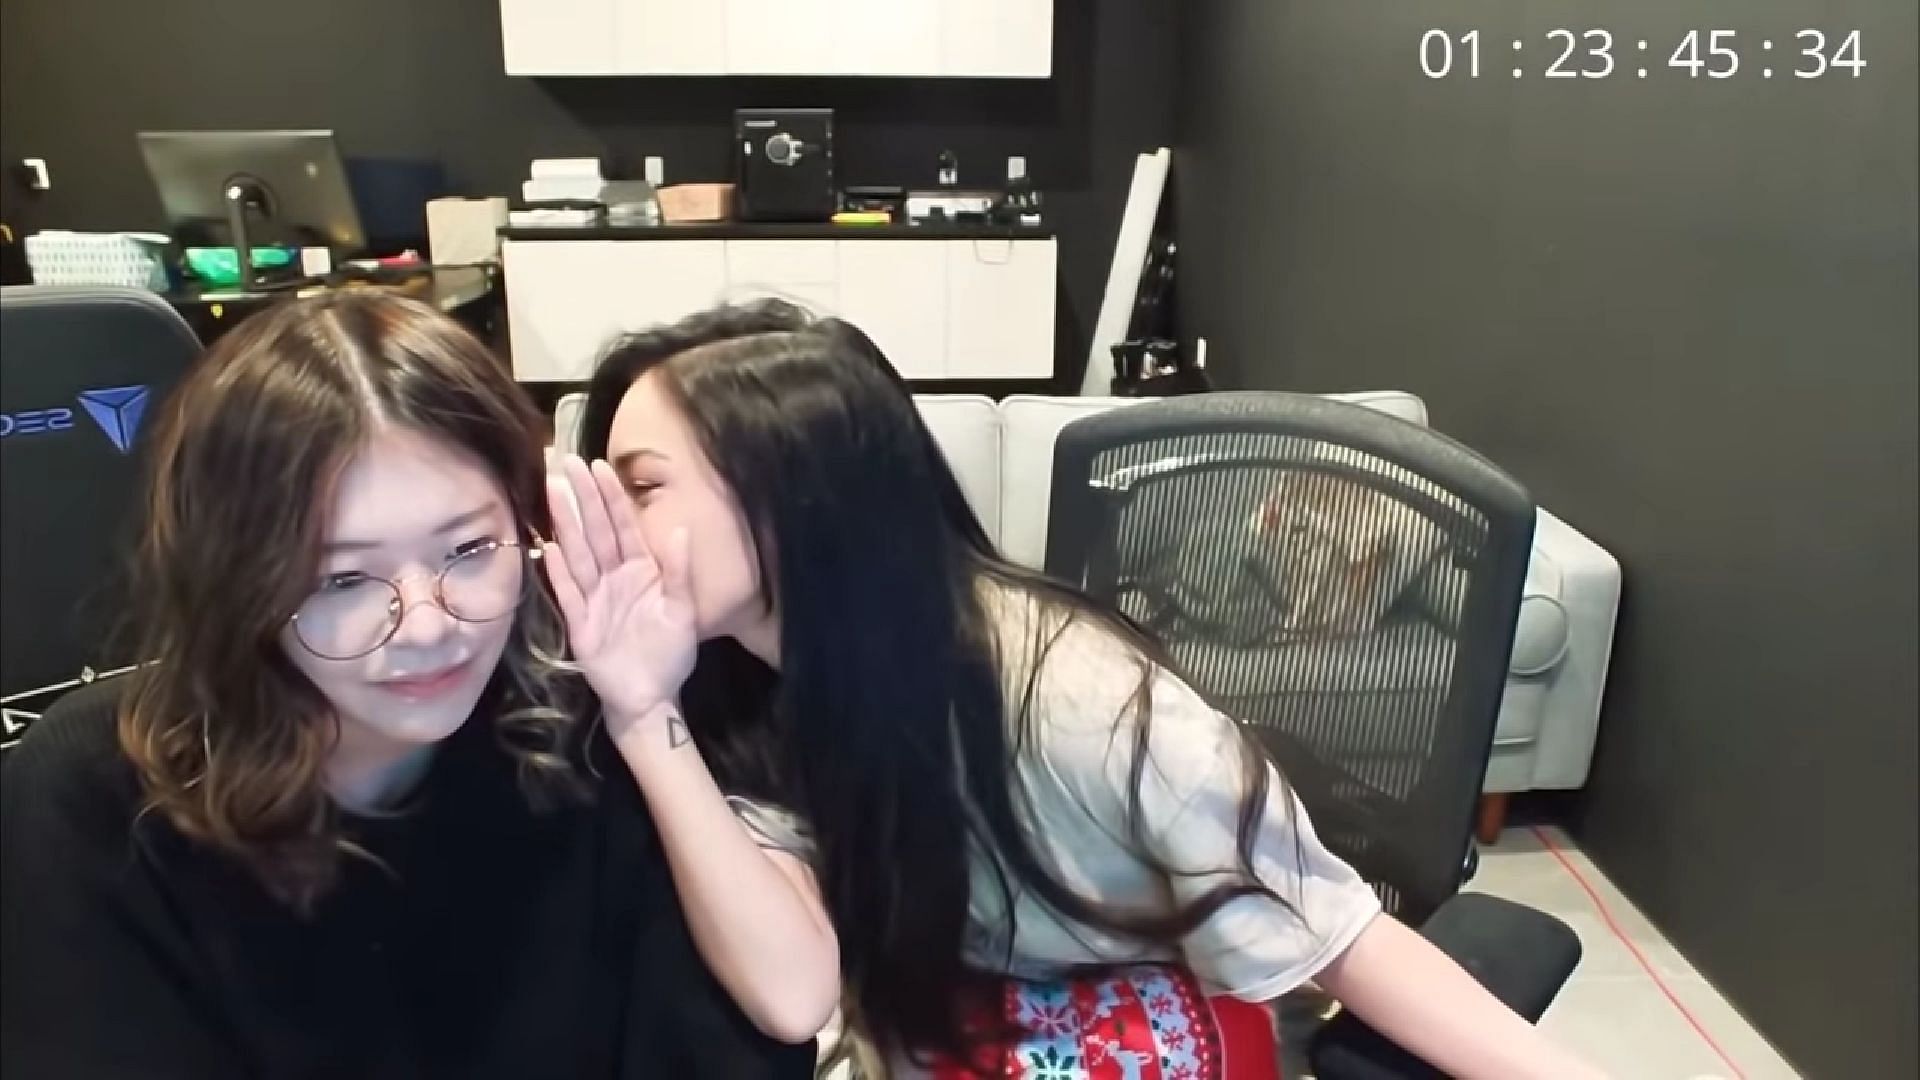 Valkyrae and Miyoung have big news for their fans, leading to other speculations (Image via JeruTV on YouTube)